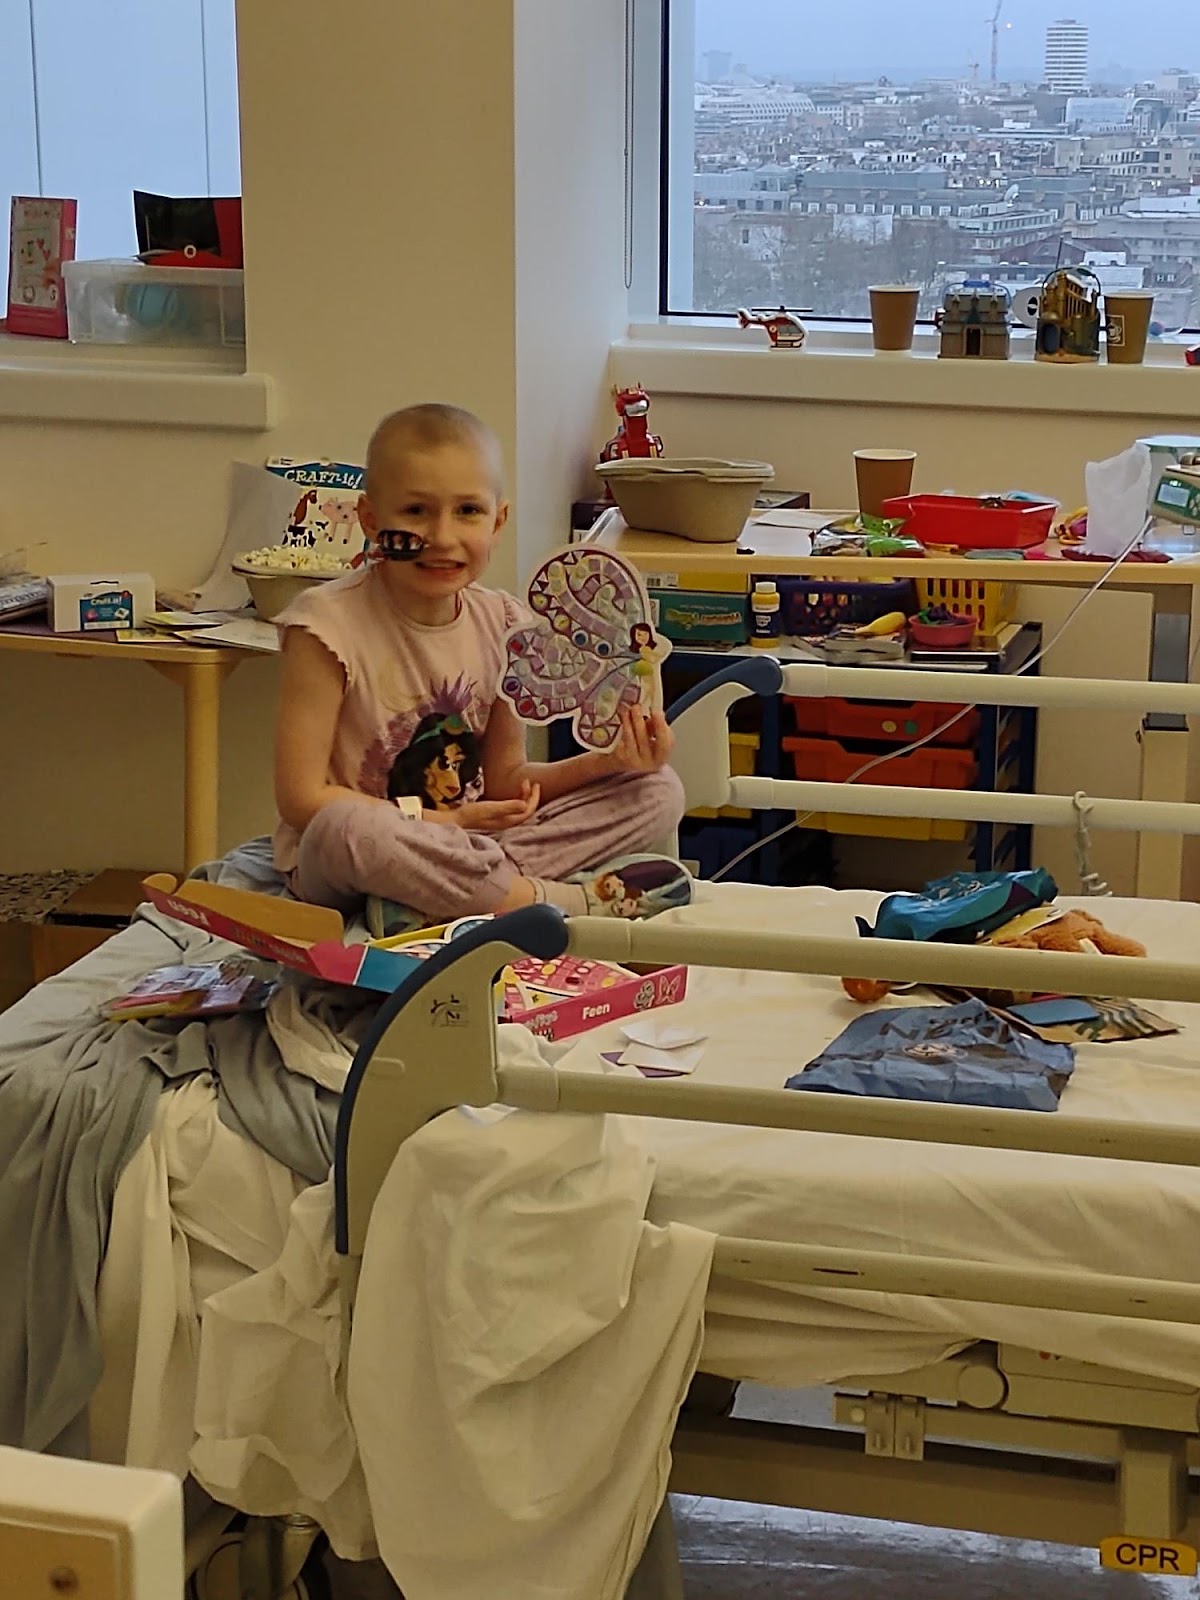 A young female neuroblastoma patient smiling and sitting on a hospital bed